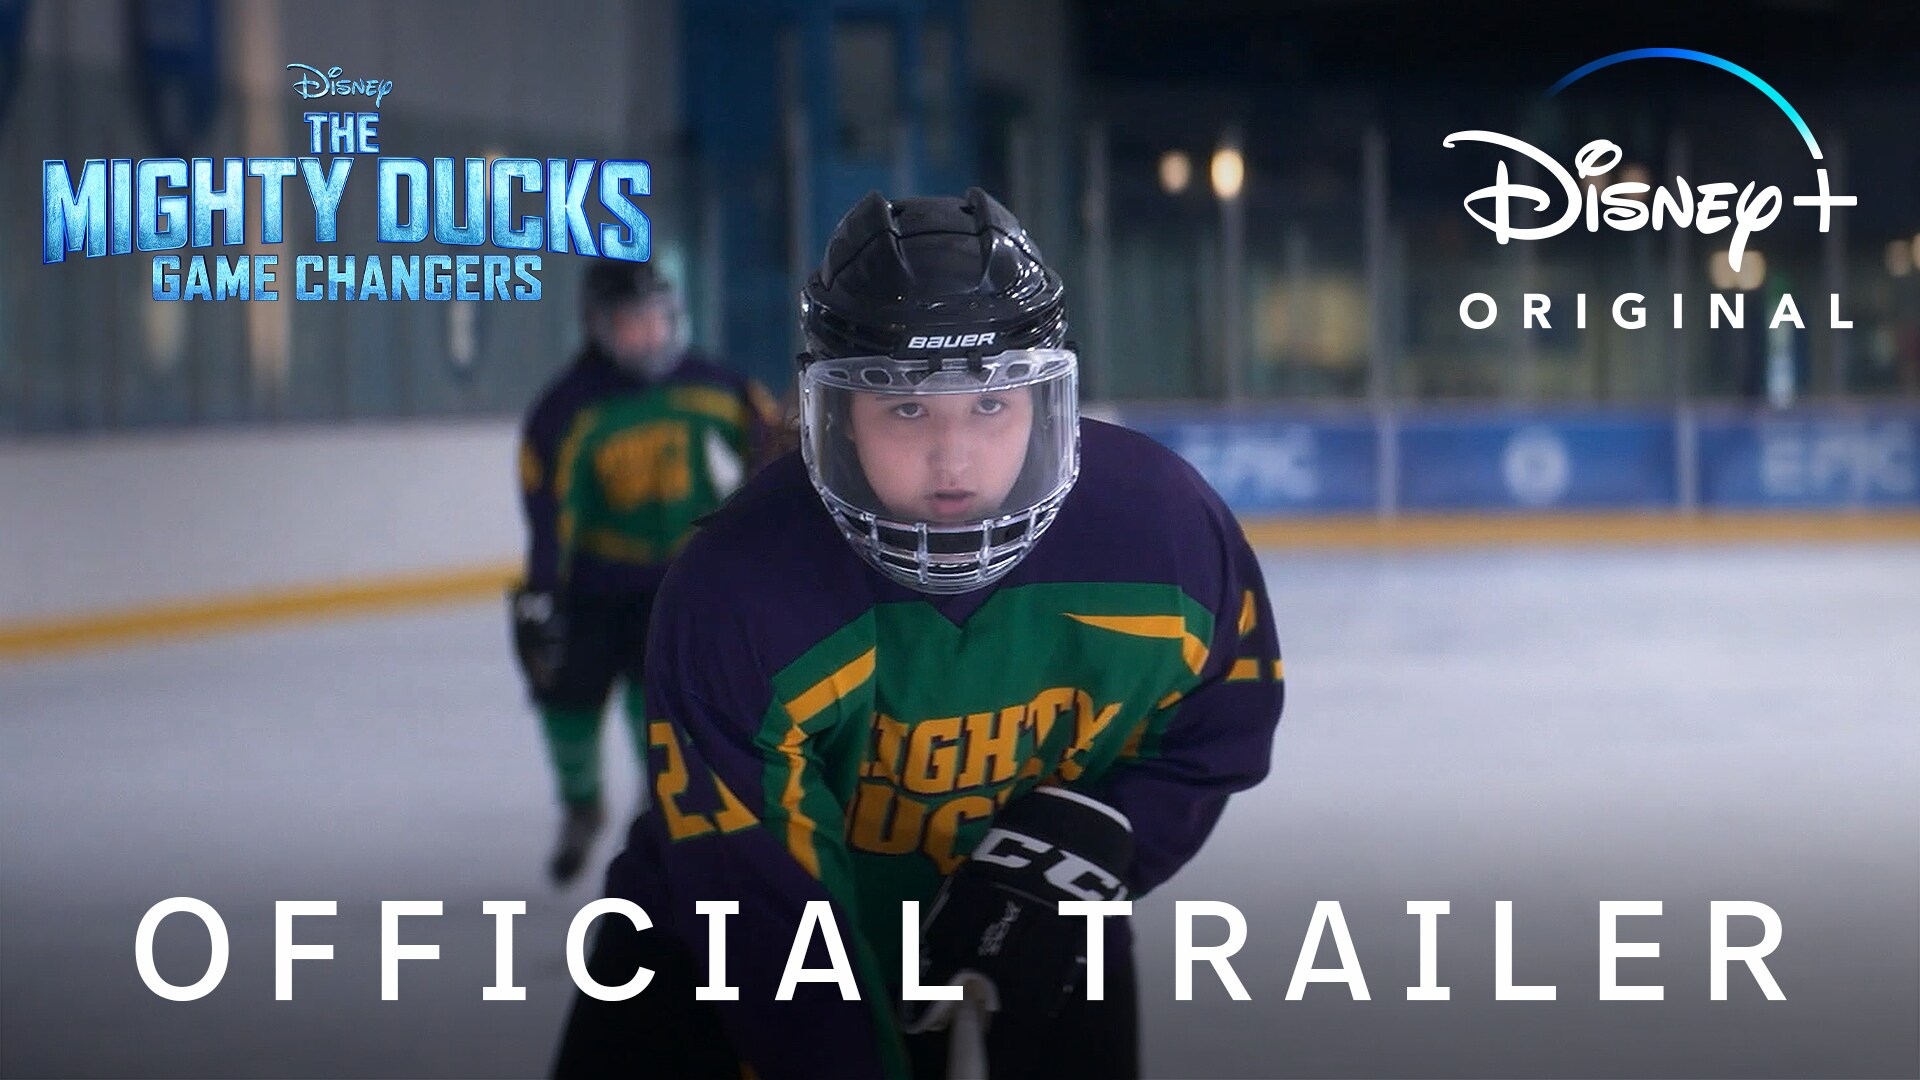 The Mighty Ducks: Game Changers Season 2 — Not So Mighty., by S35 Network